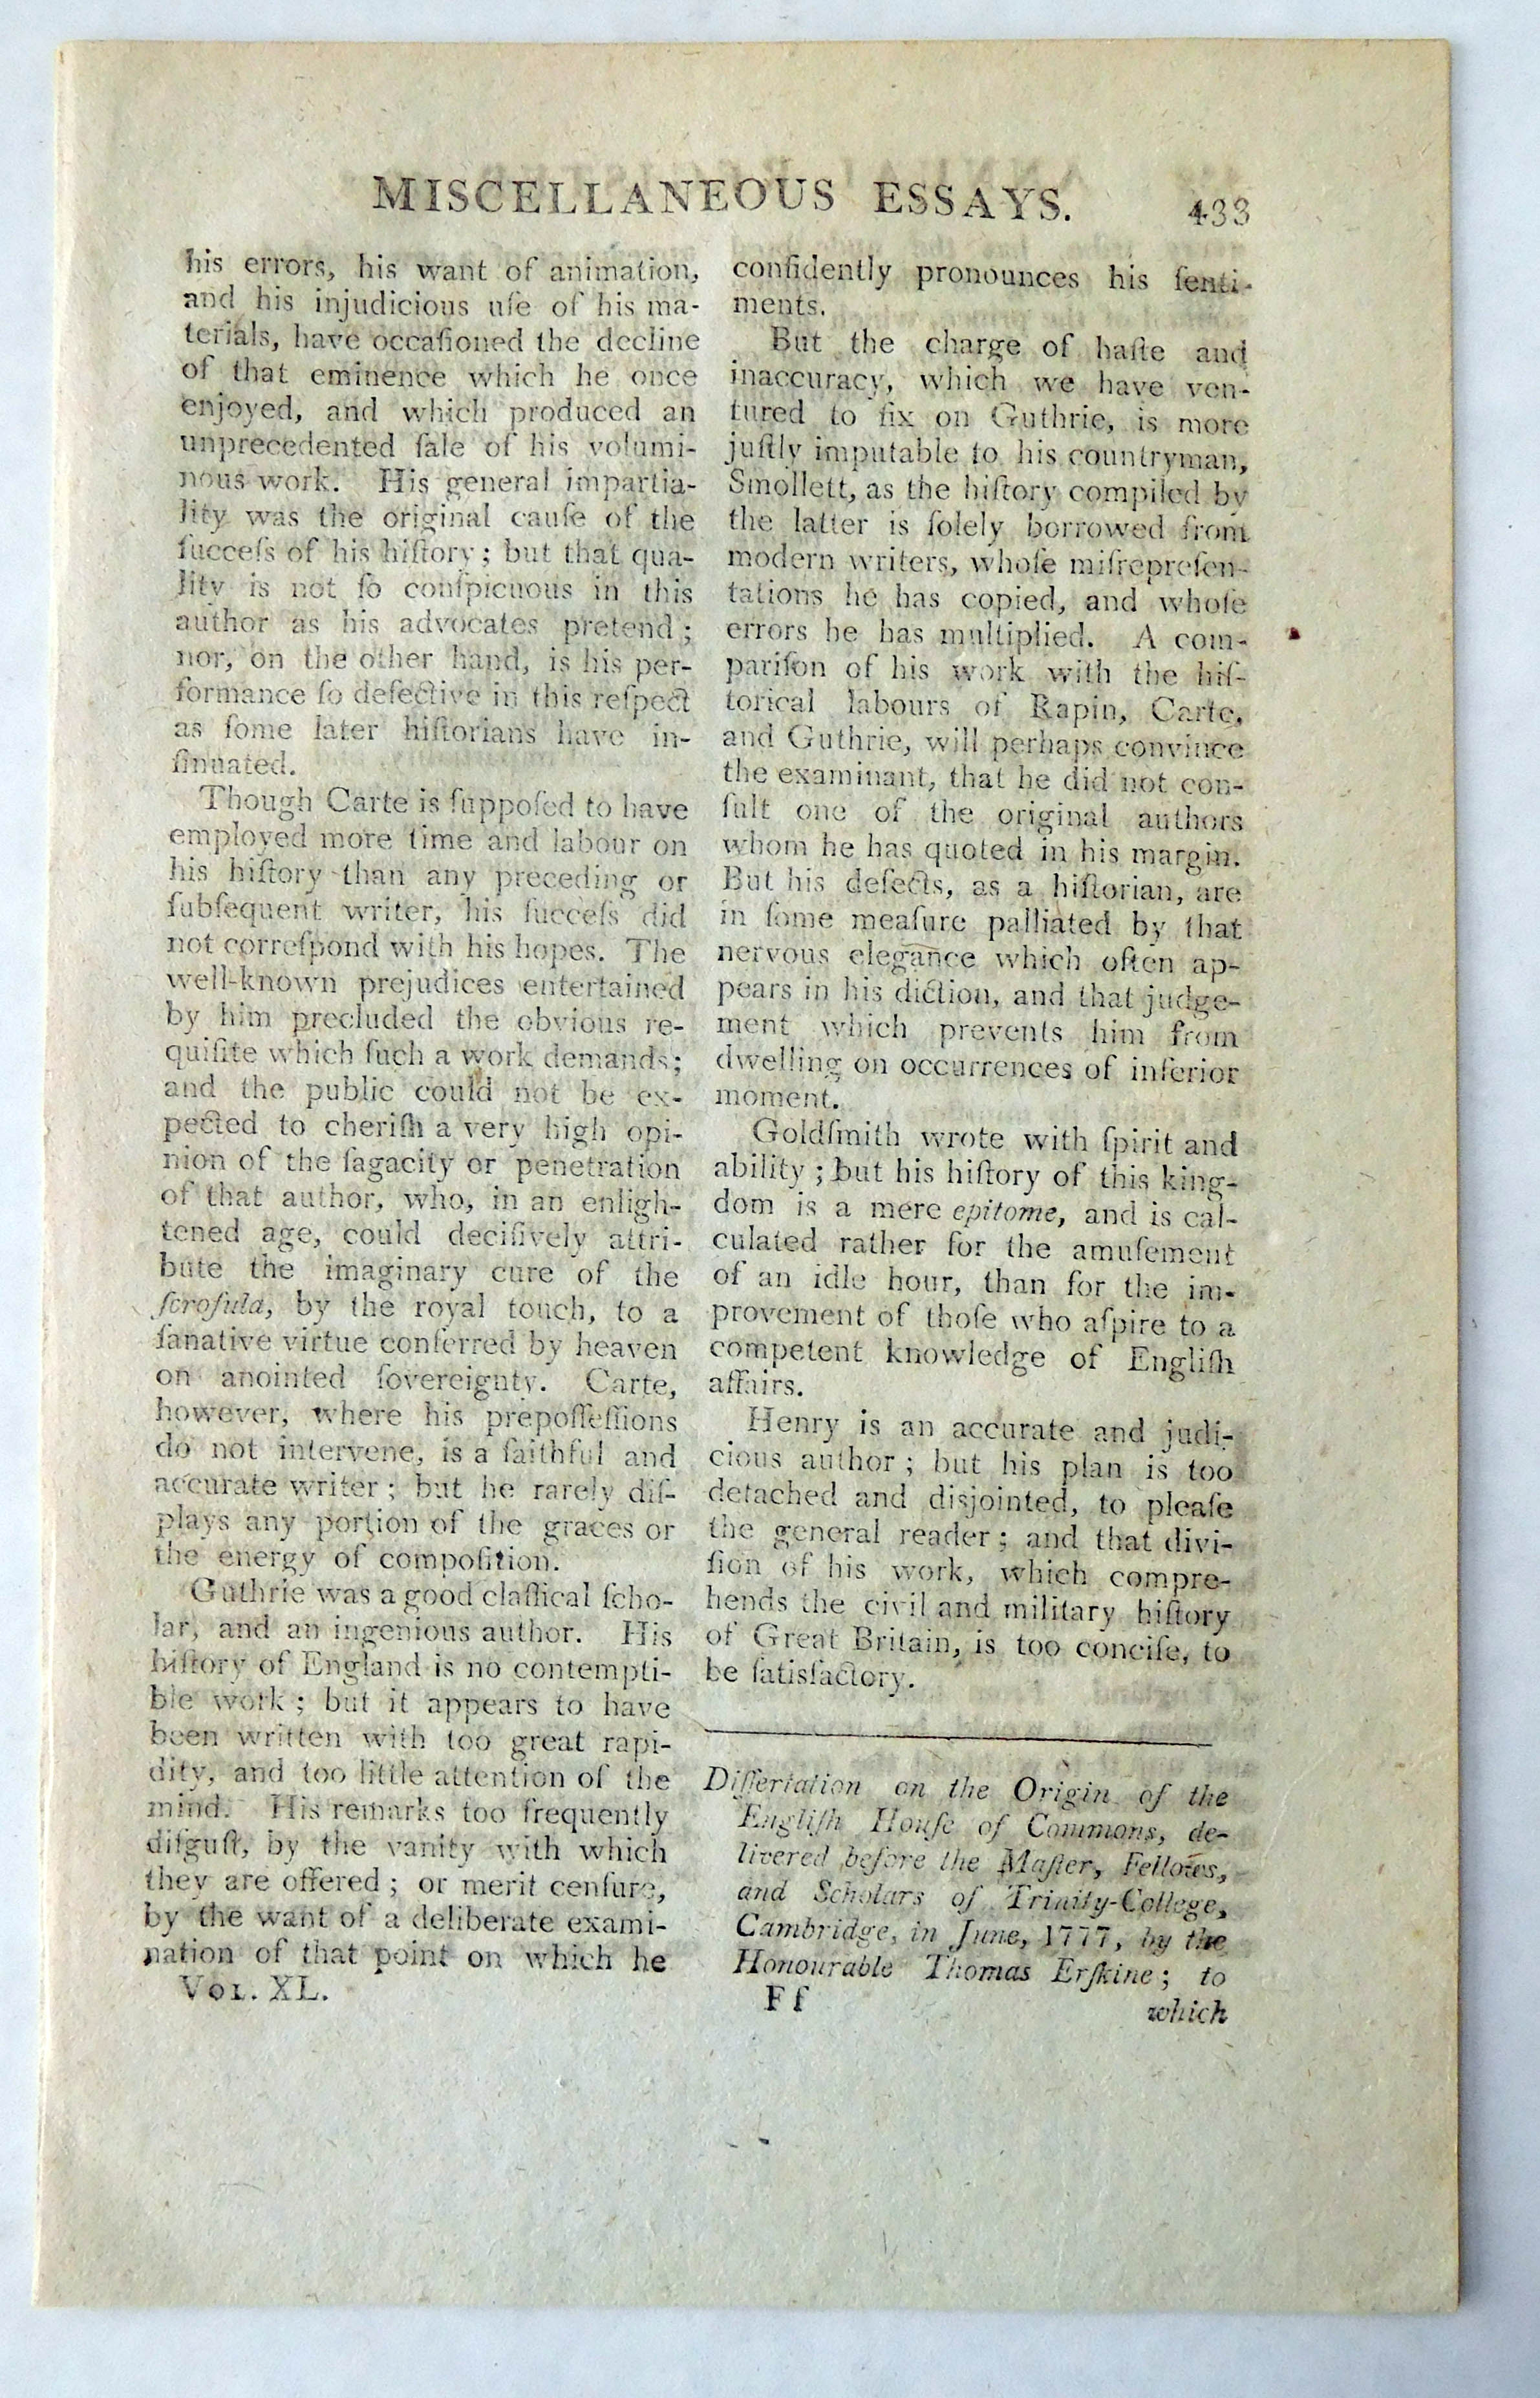 Erskine, Thomas - Dissertation on the Origin of the English House of Commons, delivered before the Master, Fellows, and Scholars of Trinity College, Cambridge, in June 1777 to which the first Prize of the Year was adjudged